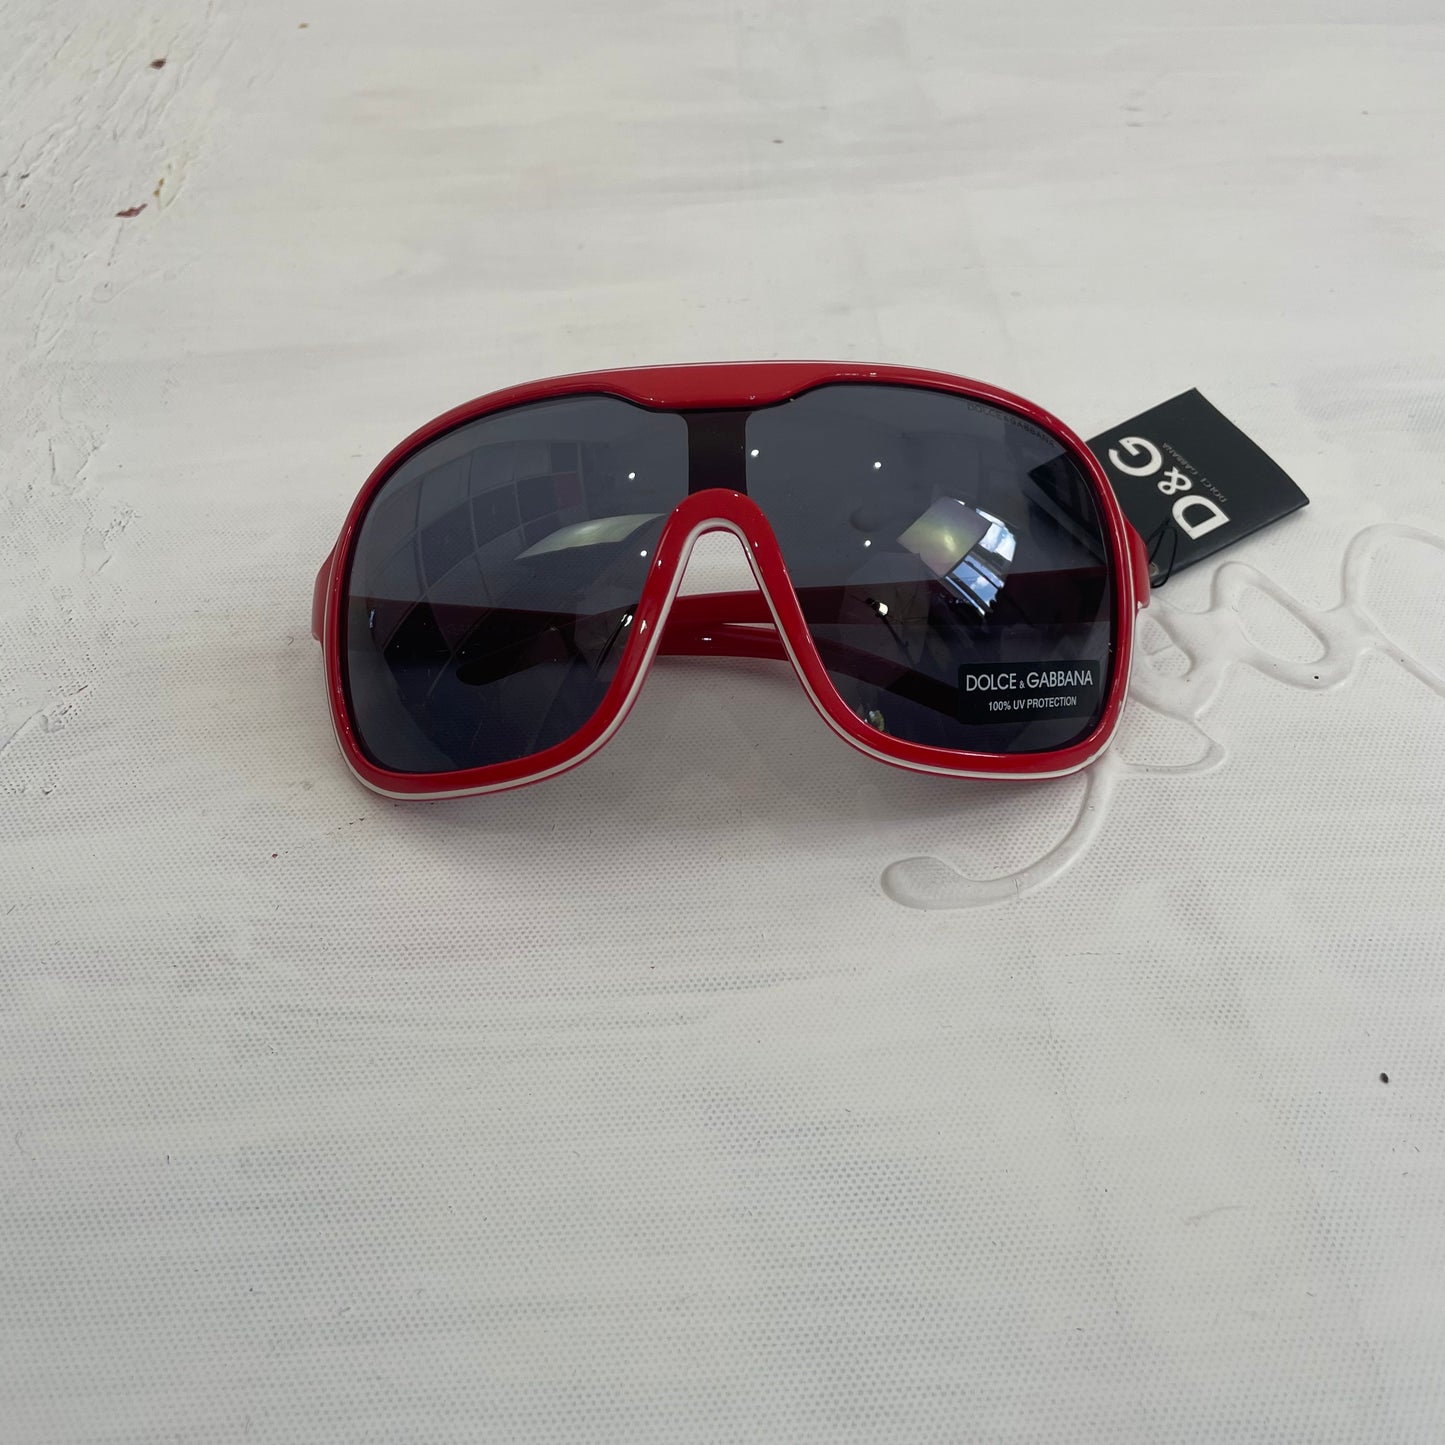 SUMMER ‘IT GIRL’ DROP | red D&G style sunglasses